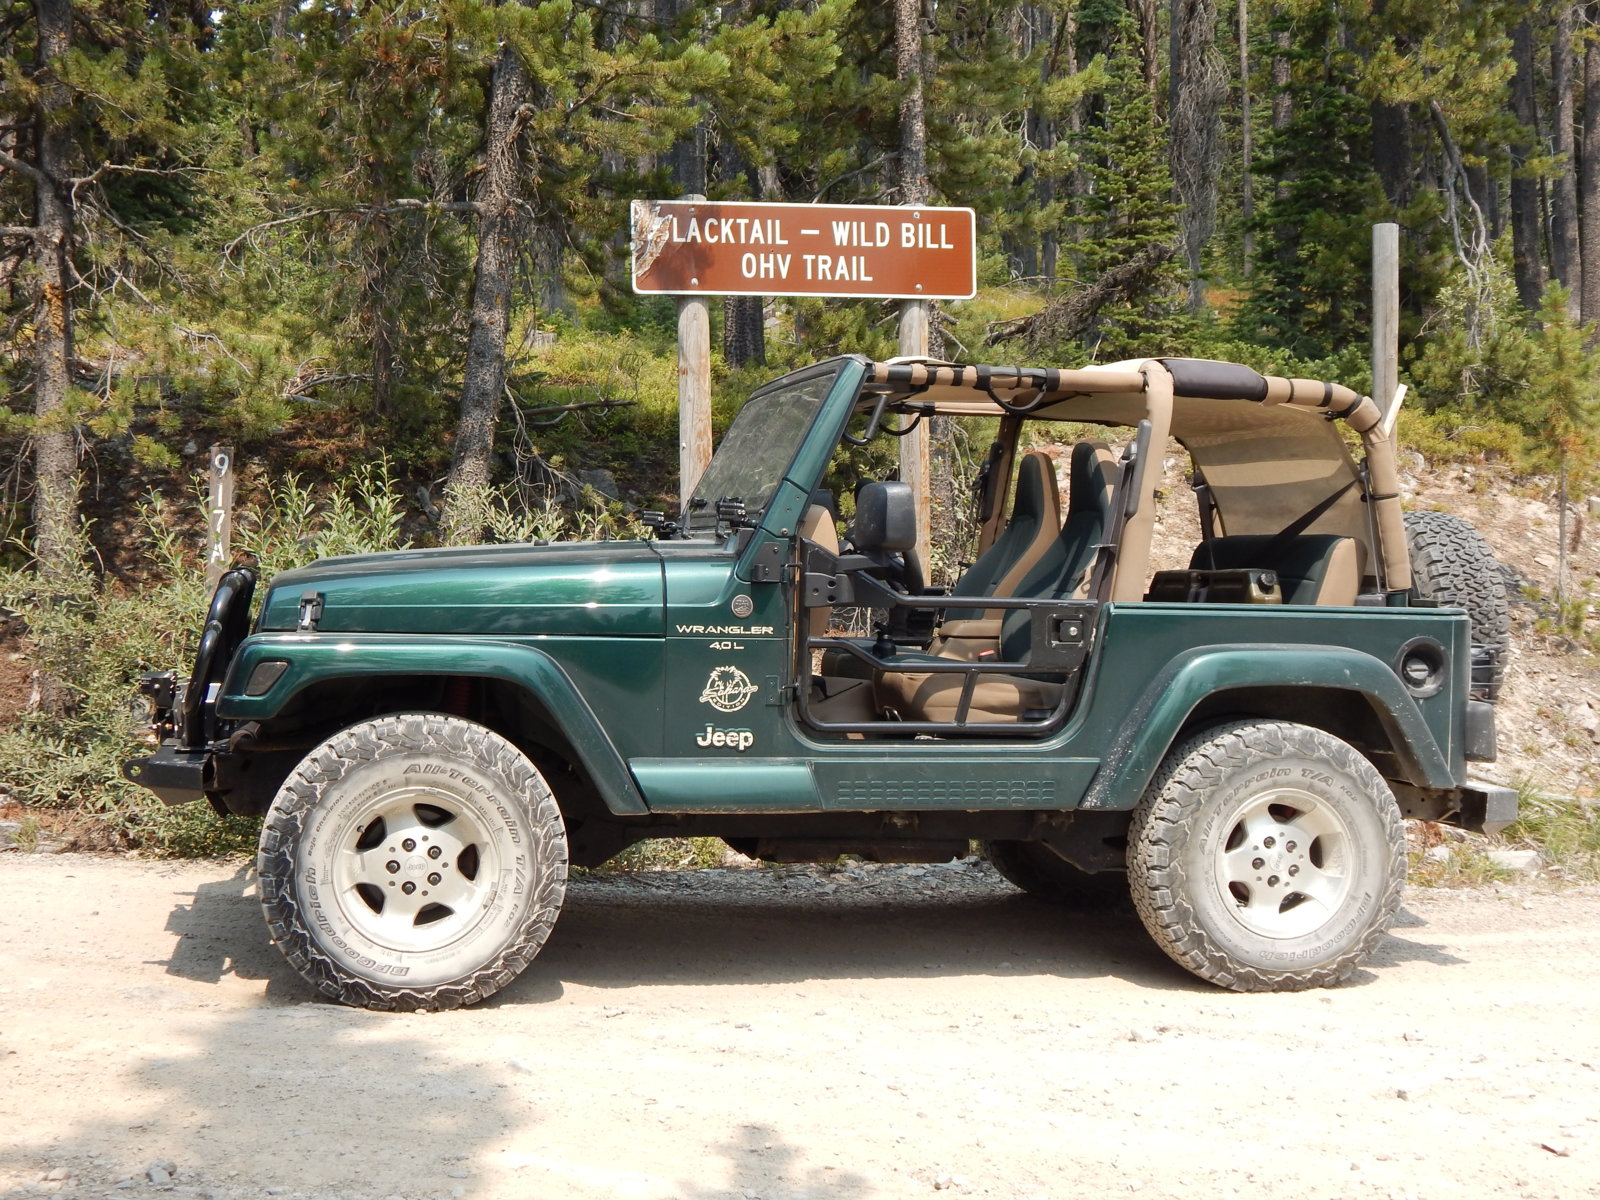 Post pictures of your green TJs | Jeep Wrangler TJ Forum